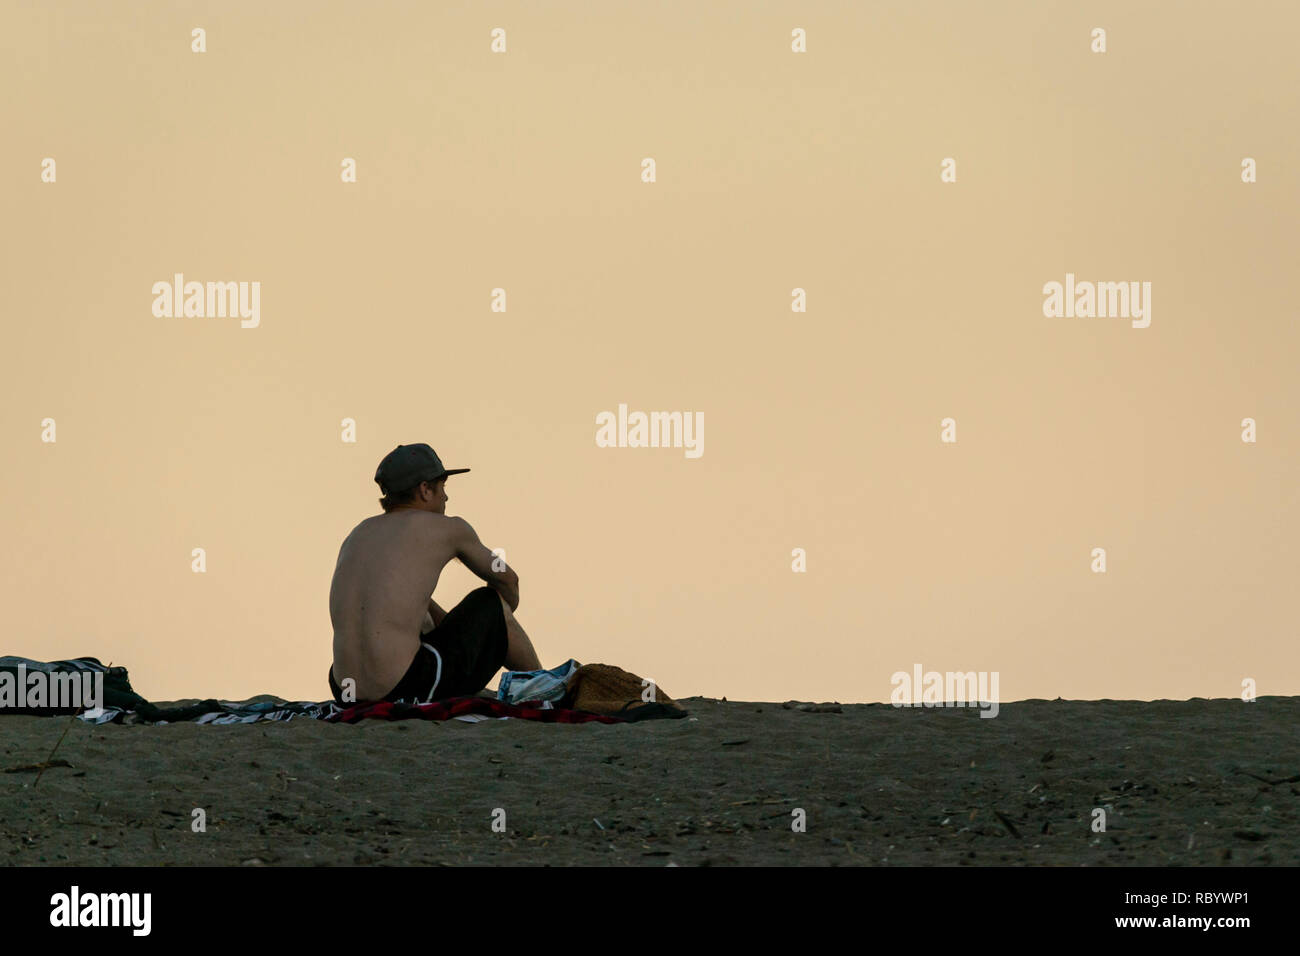 One man with cap sitting on a deserted beach. Stock Photo